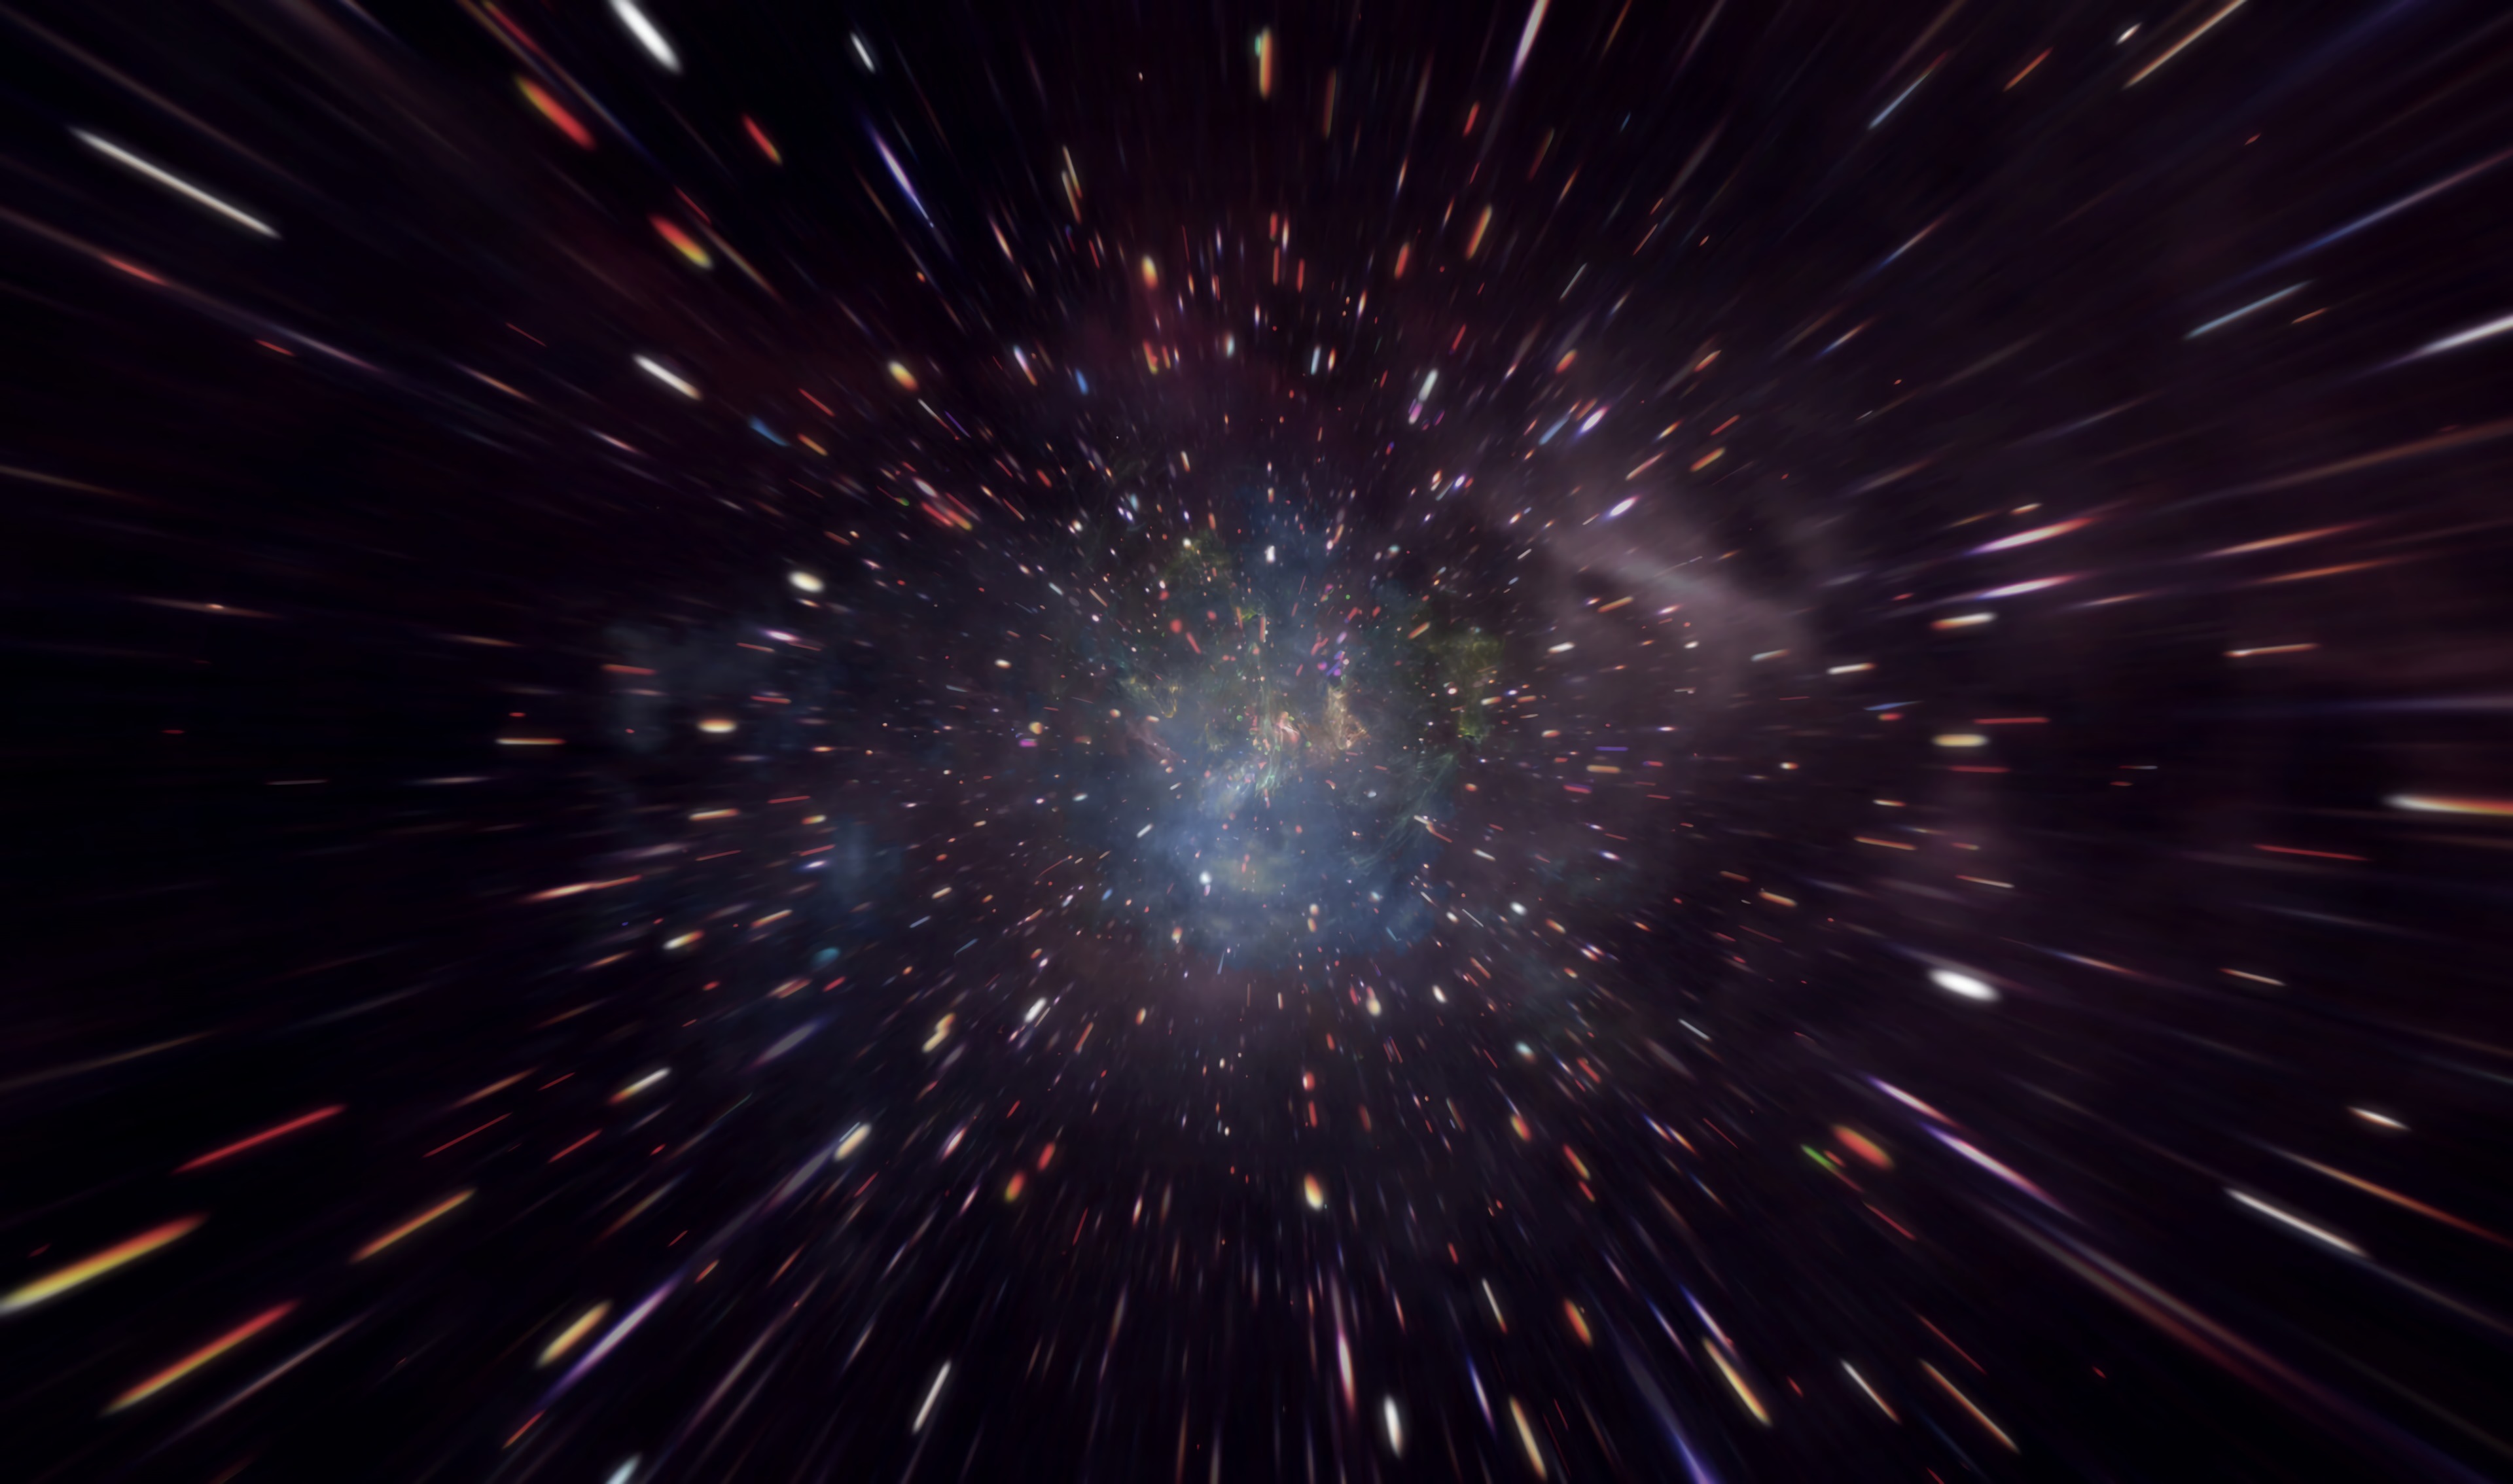 cosmic explosion, abstract, smoke, sparks, shards, smithereens, space explosion